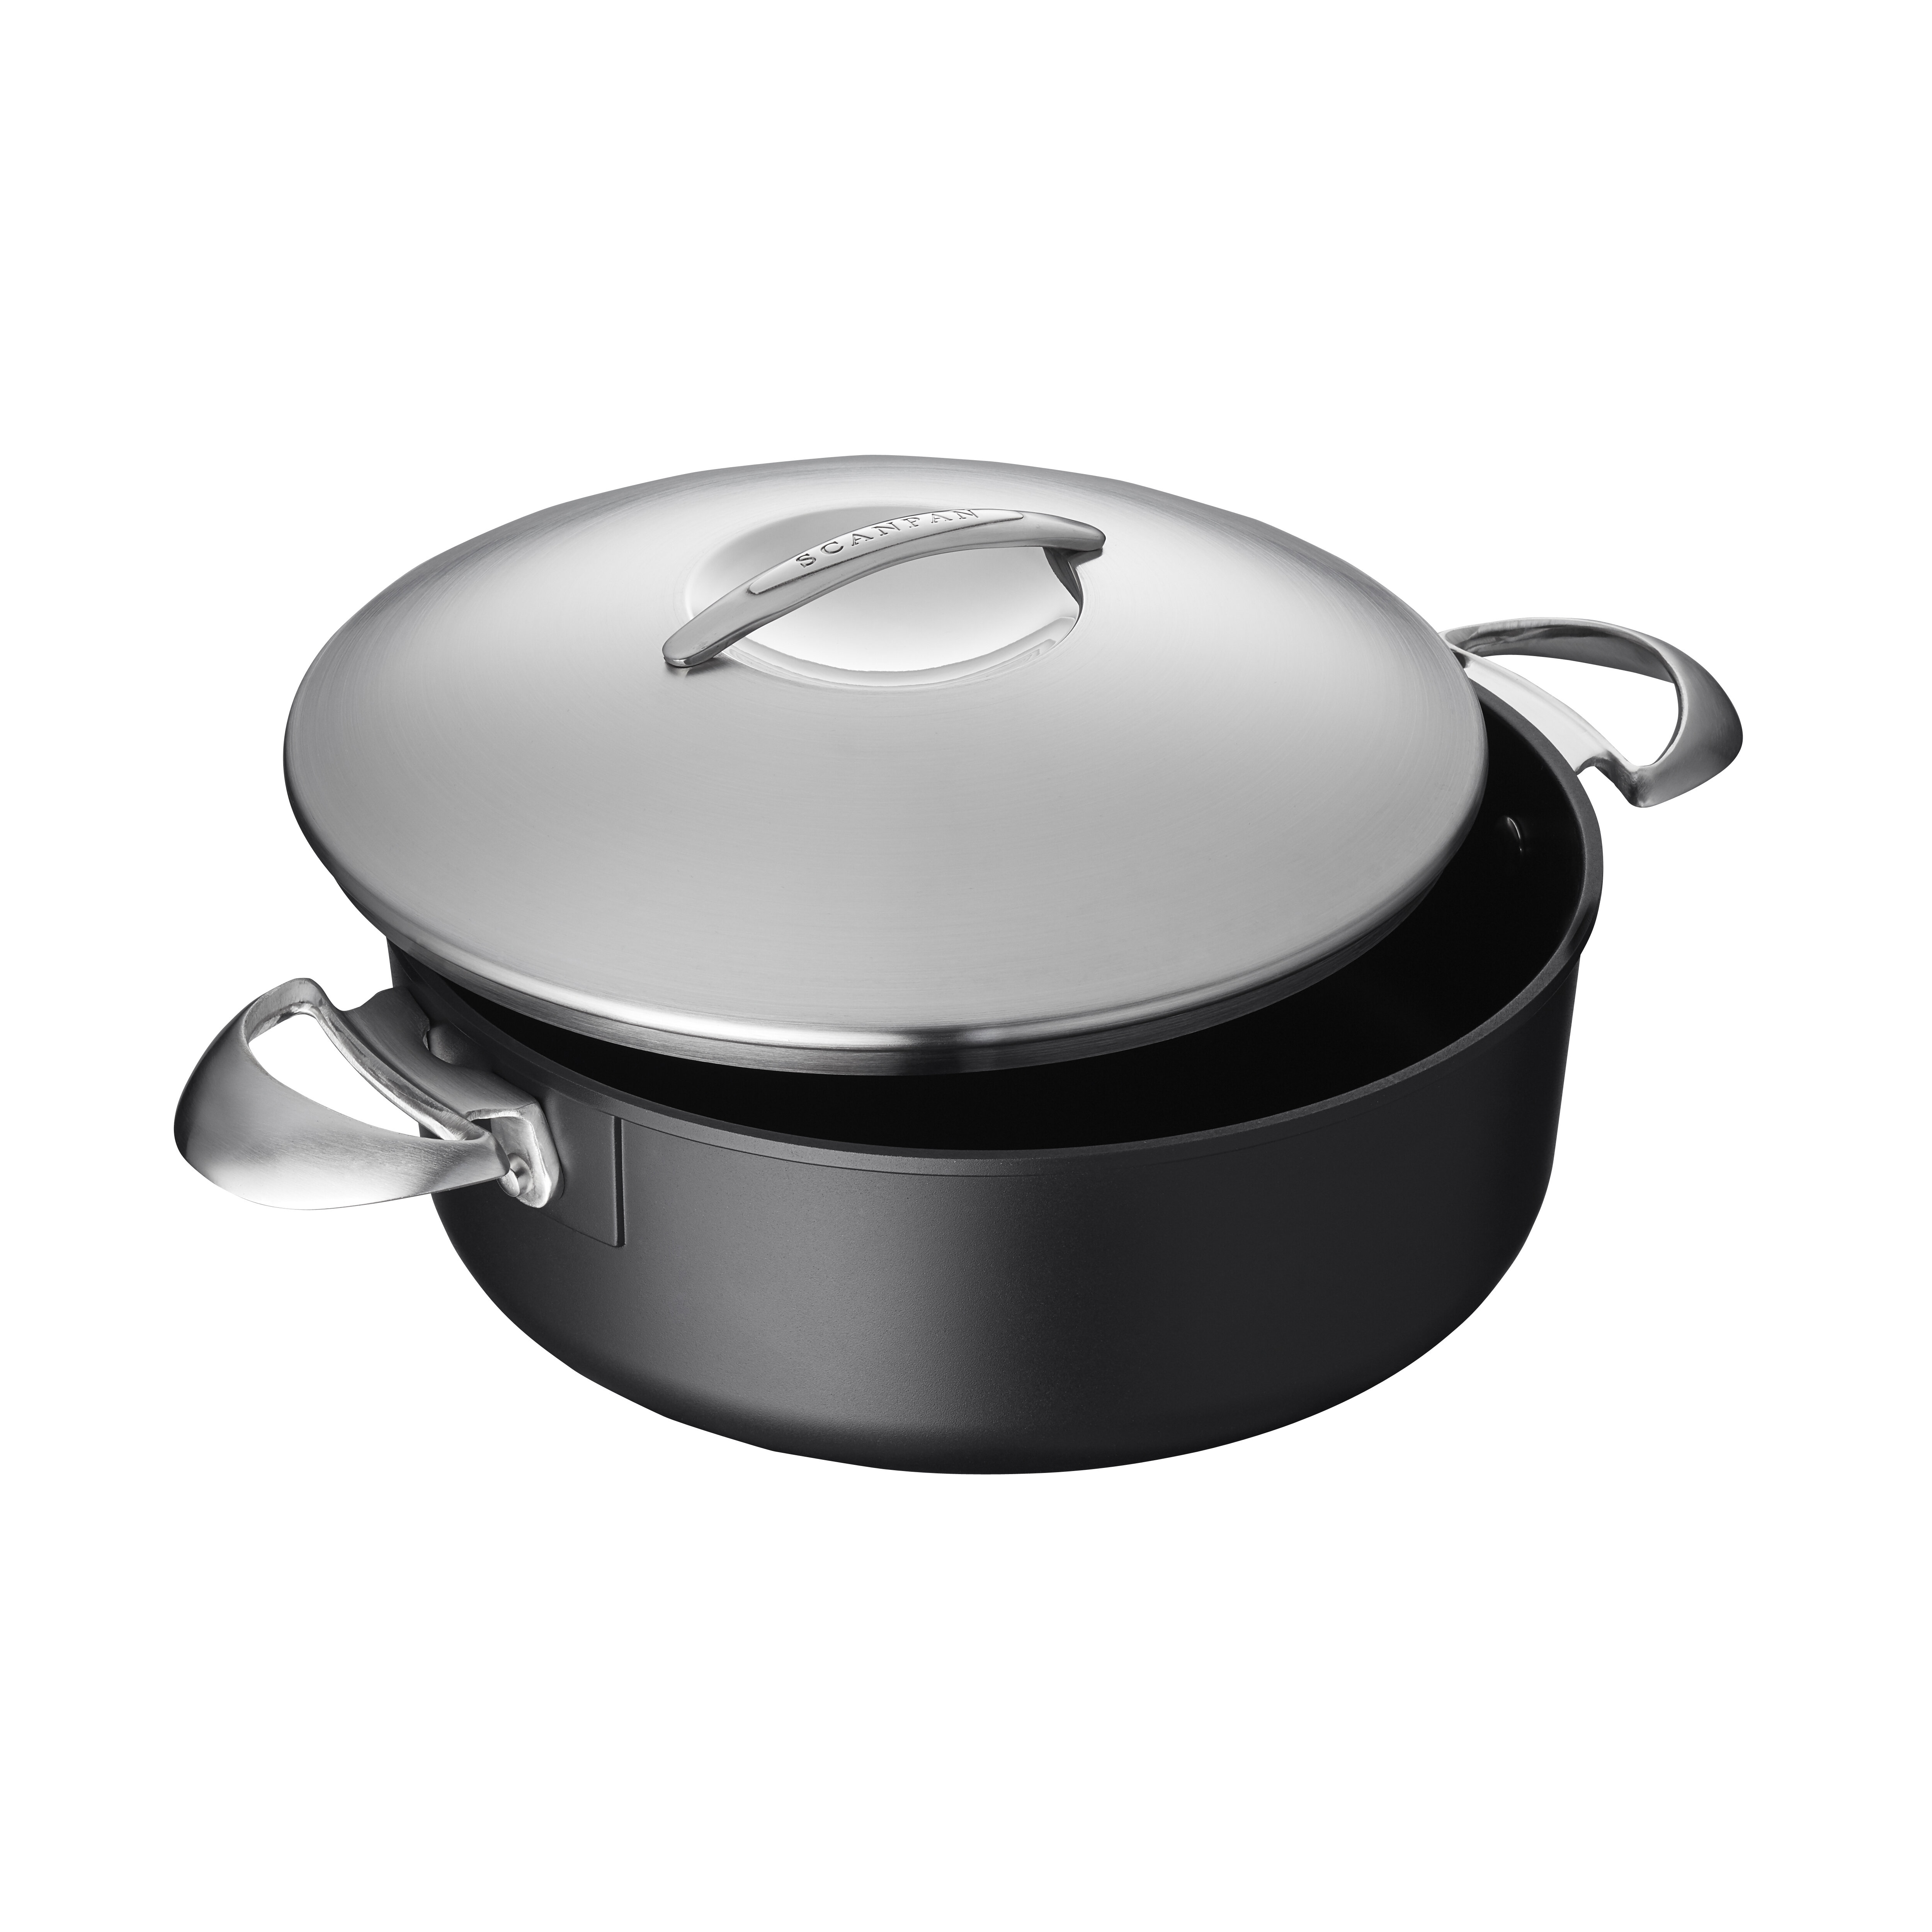 Cuisinart Chef's Classic 12.5-in Aluminum Cooking Pan with Lid(s) Included  at